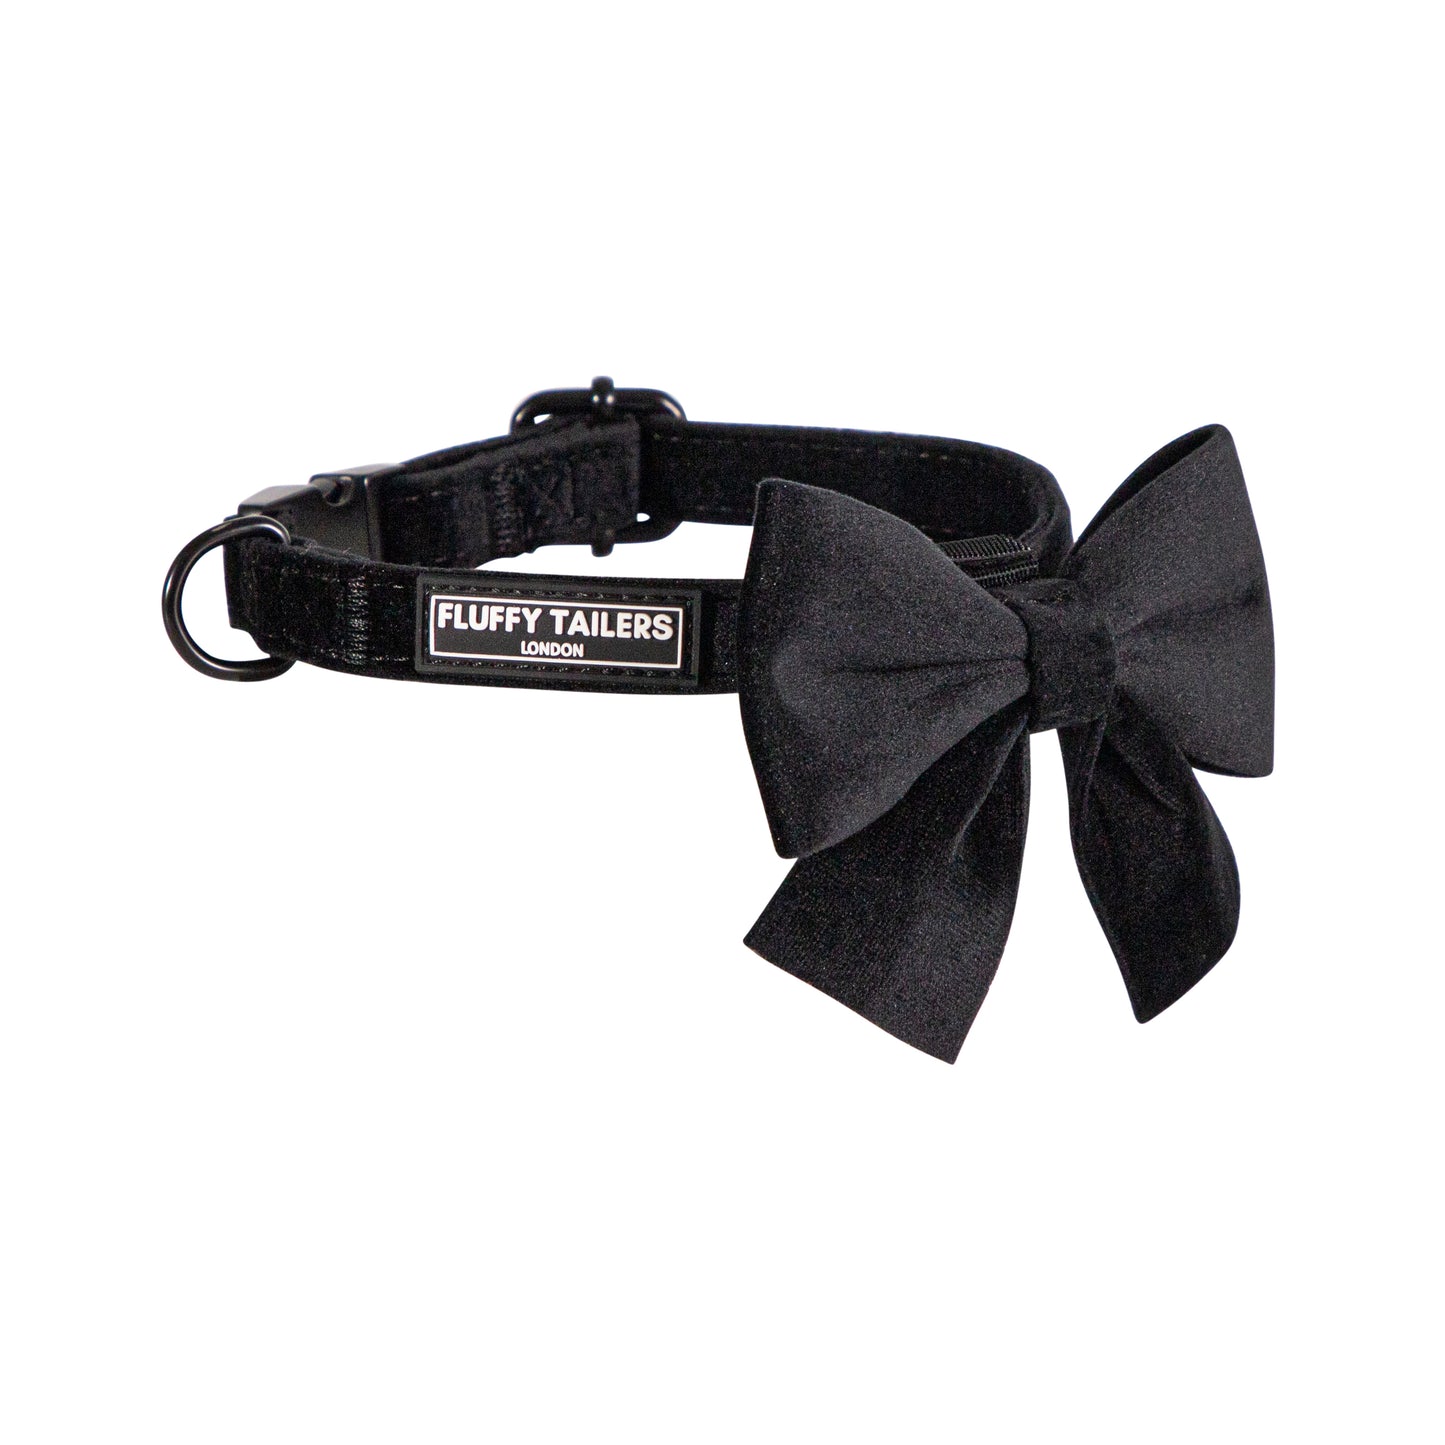 Classic Black Velvet Full Collection- - Dog Collar, Bow Tie, Leash and Poop Bag Holder